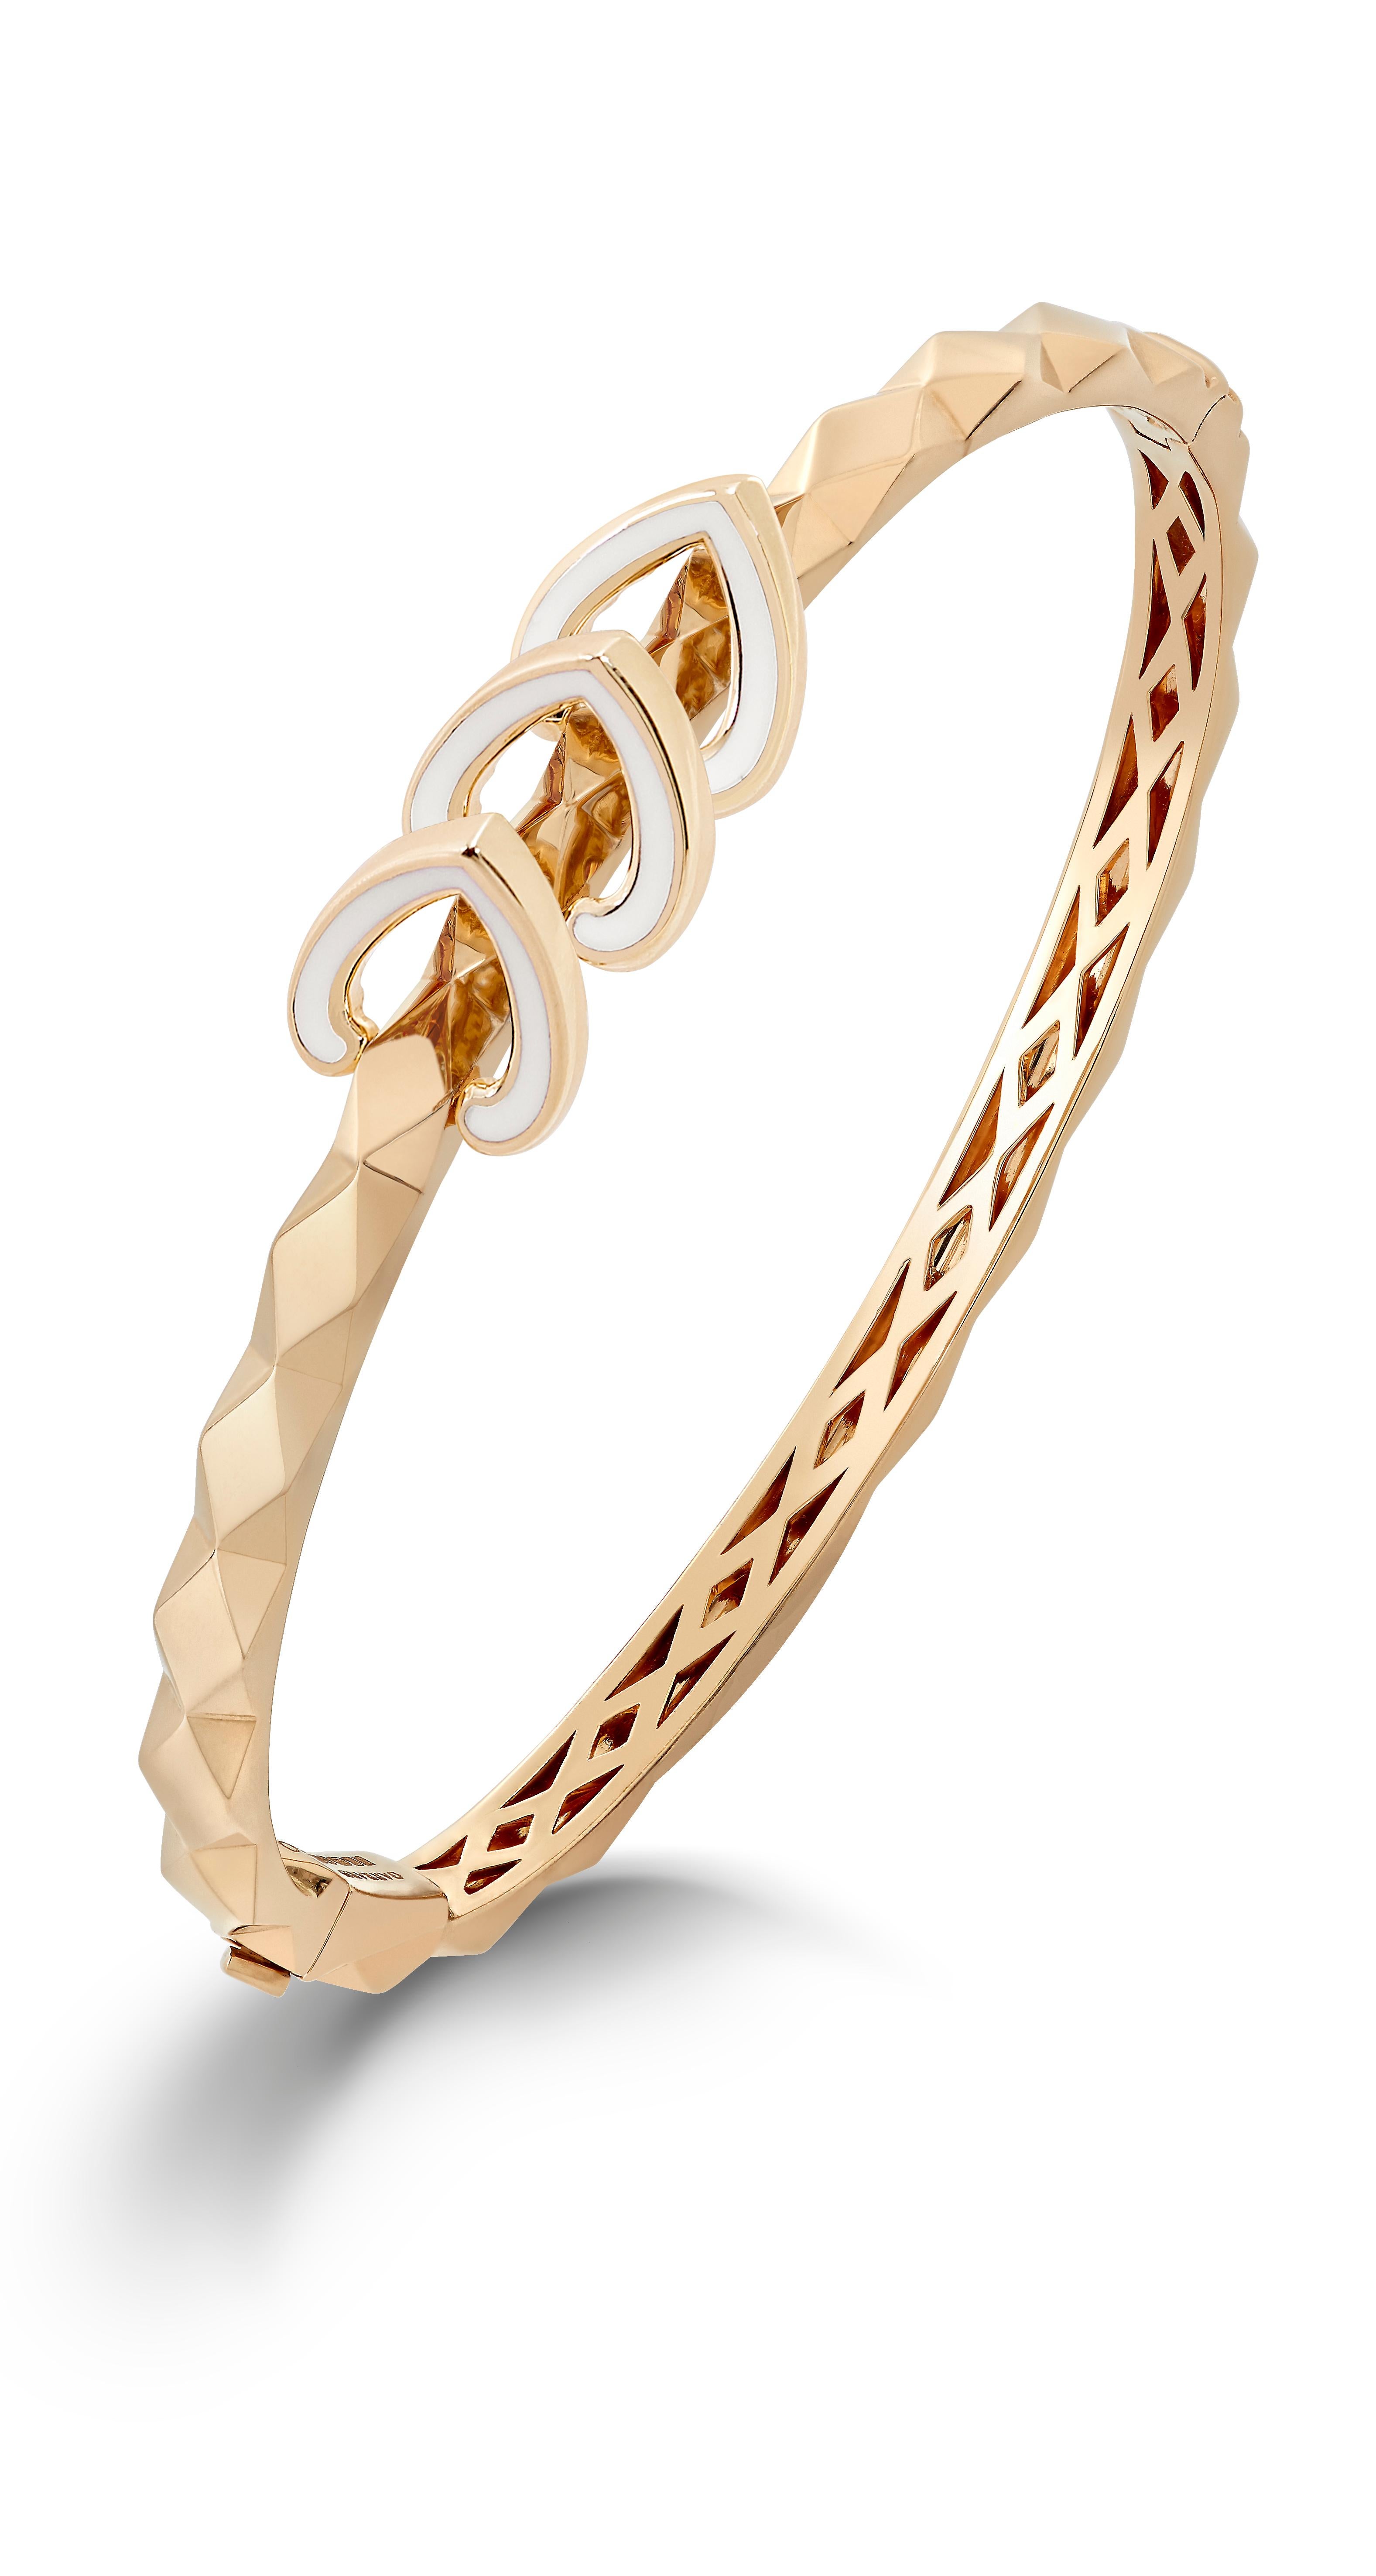 A House of Garrard 18 karat yellow gold bangle from the 'Aloria' collection, patterned with faceted gold and centered with 3 reversible round white diamond and white enamel motifs. 

39 round white diamonds weighing: 0.68cts
Dimension: 60mm x